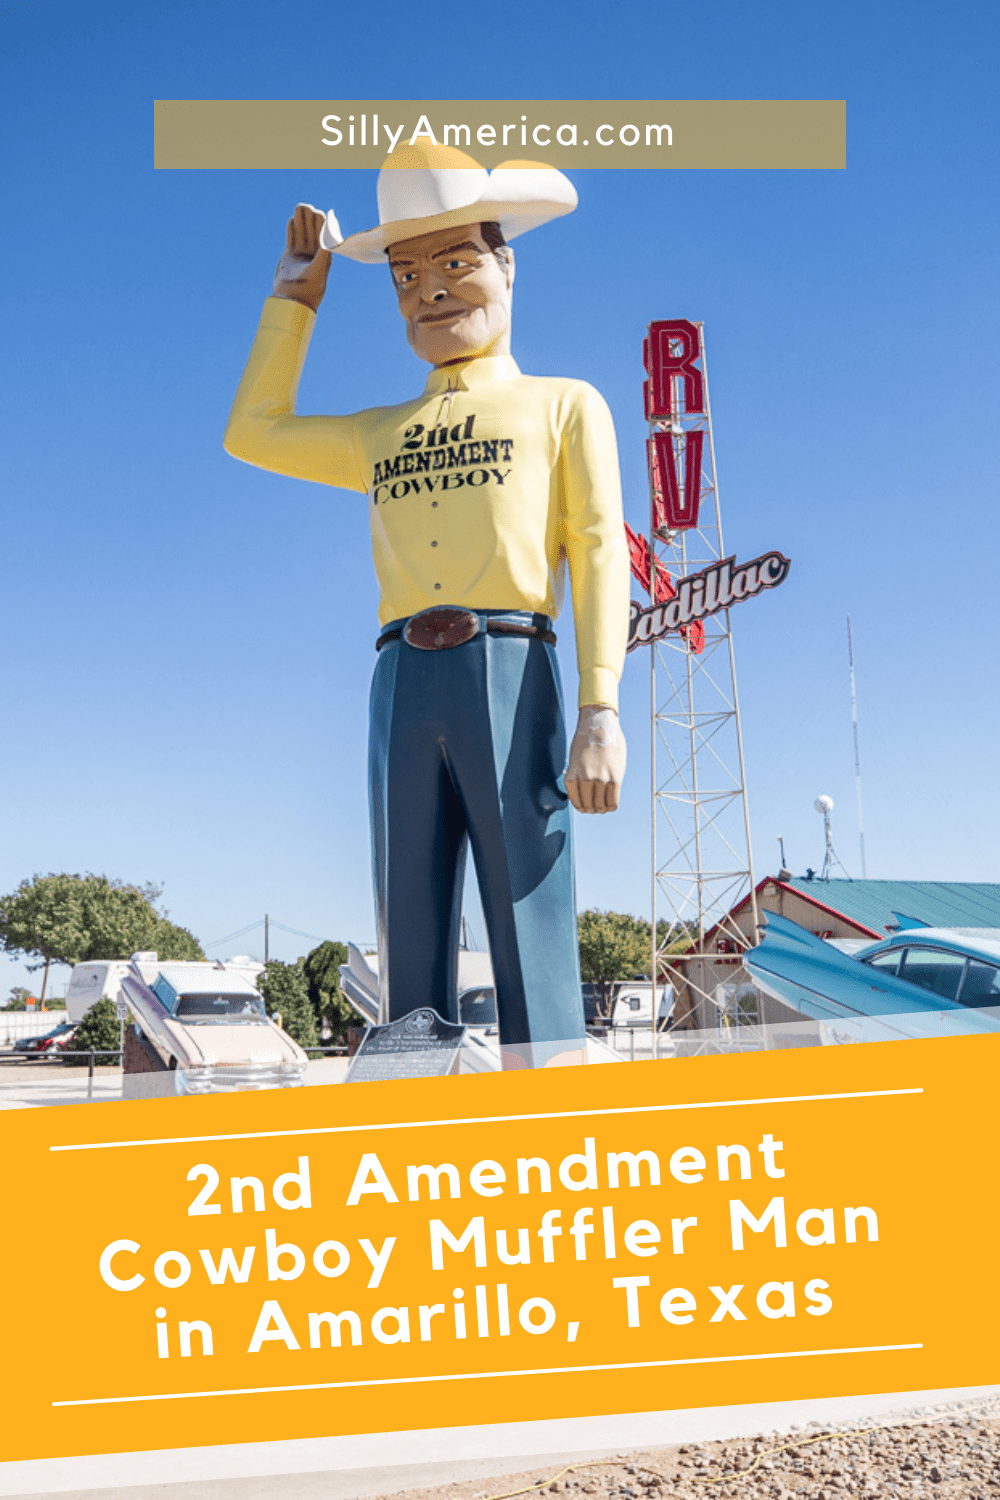 The 2nd Amendment Cowboy muffler man is a roadside attraction in Amarillo, Texas. It's hard to miss this giant man with a controversial message, located just down the road from the famed Cadillac Ranch on Route 66.  #RoadTrips #RoadTripStop #Route66 #Route66RoadTrip #TexasRoute66 #Texas #TexasRoadTrip #TexasRoadsideAttractions #RoadsideAttractions #RoadsideAttraction #RoadsideAmerica #RoadTrip #MufflerMan